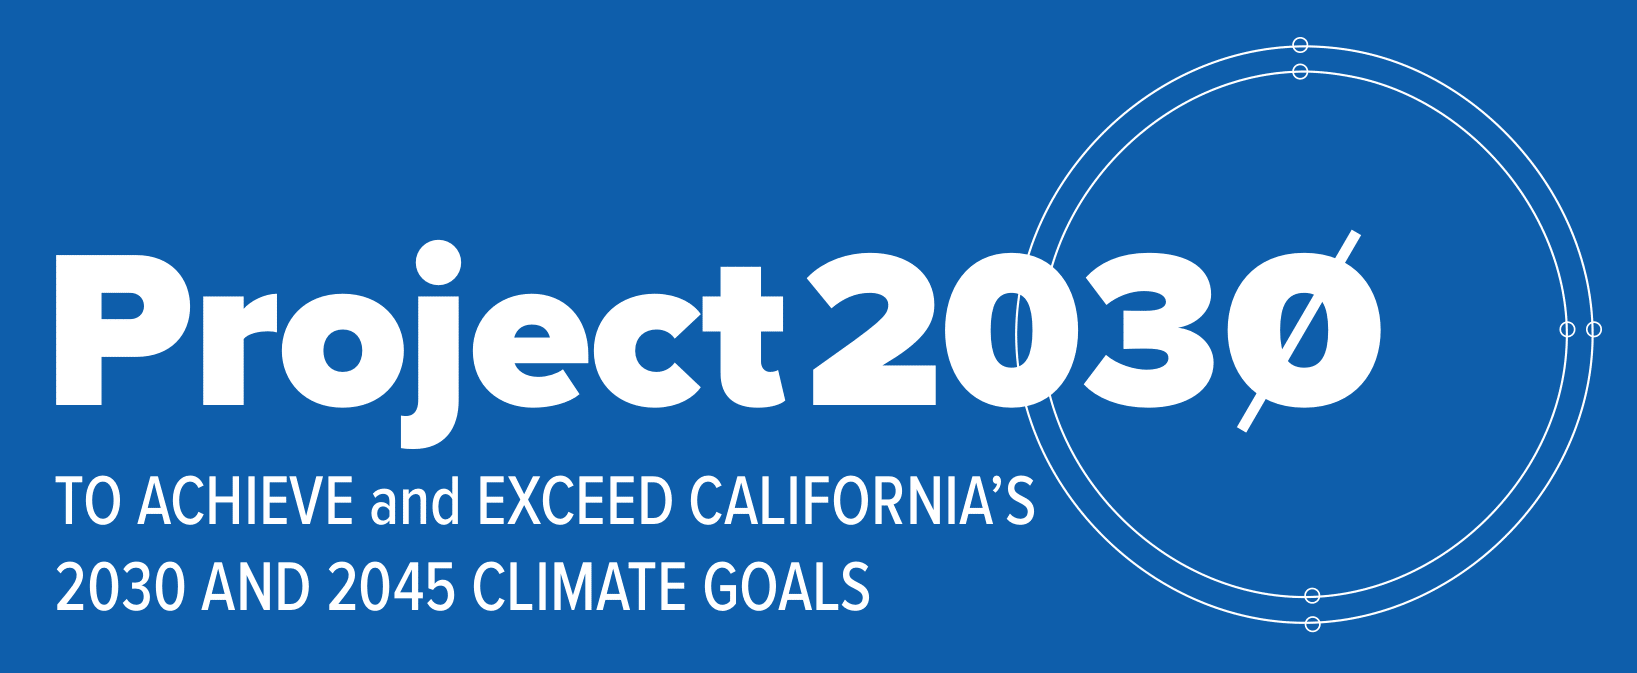 Project 2030